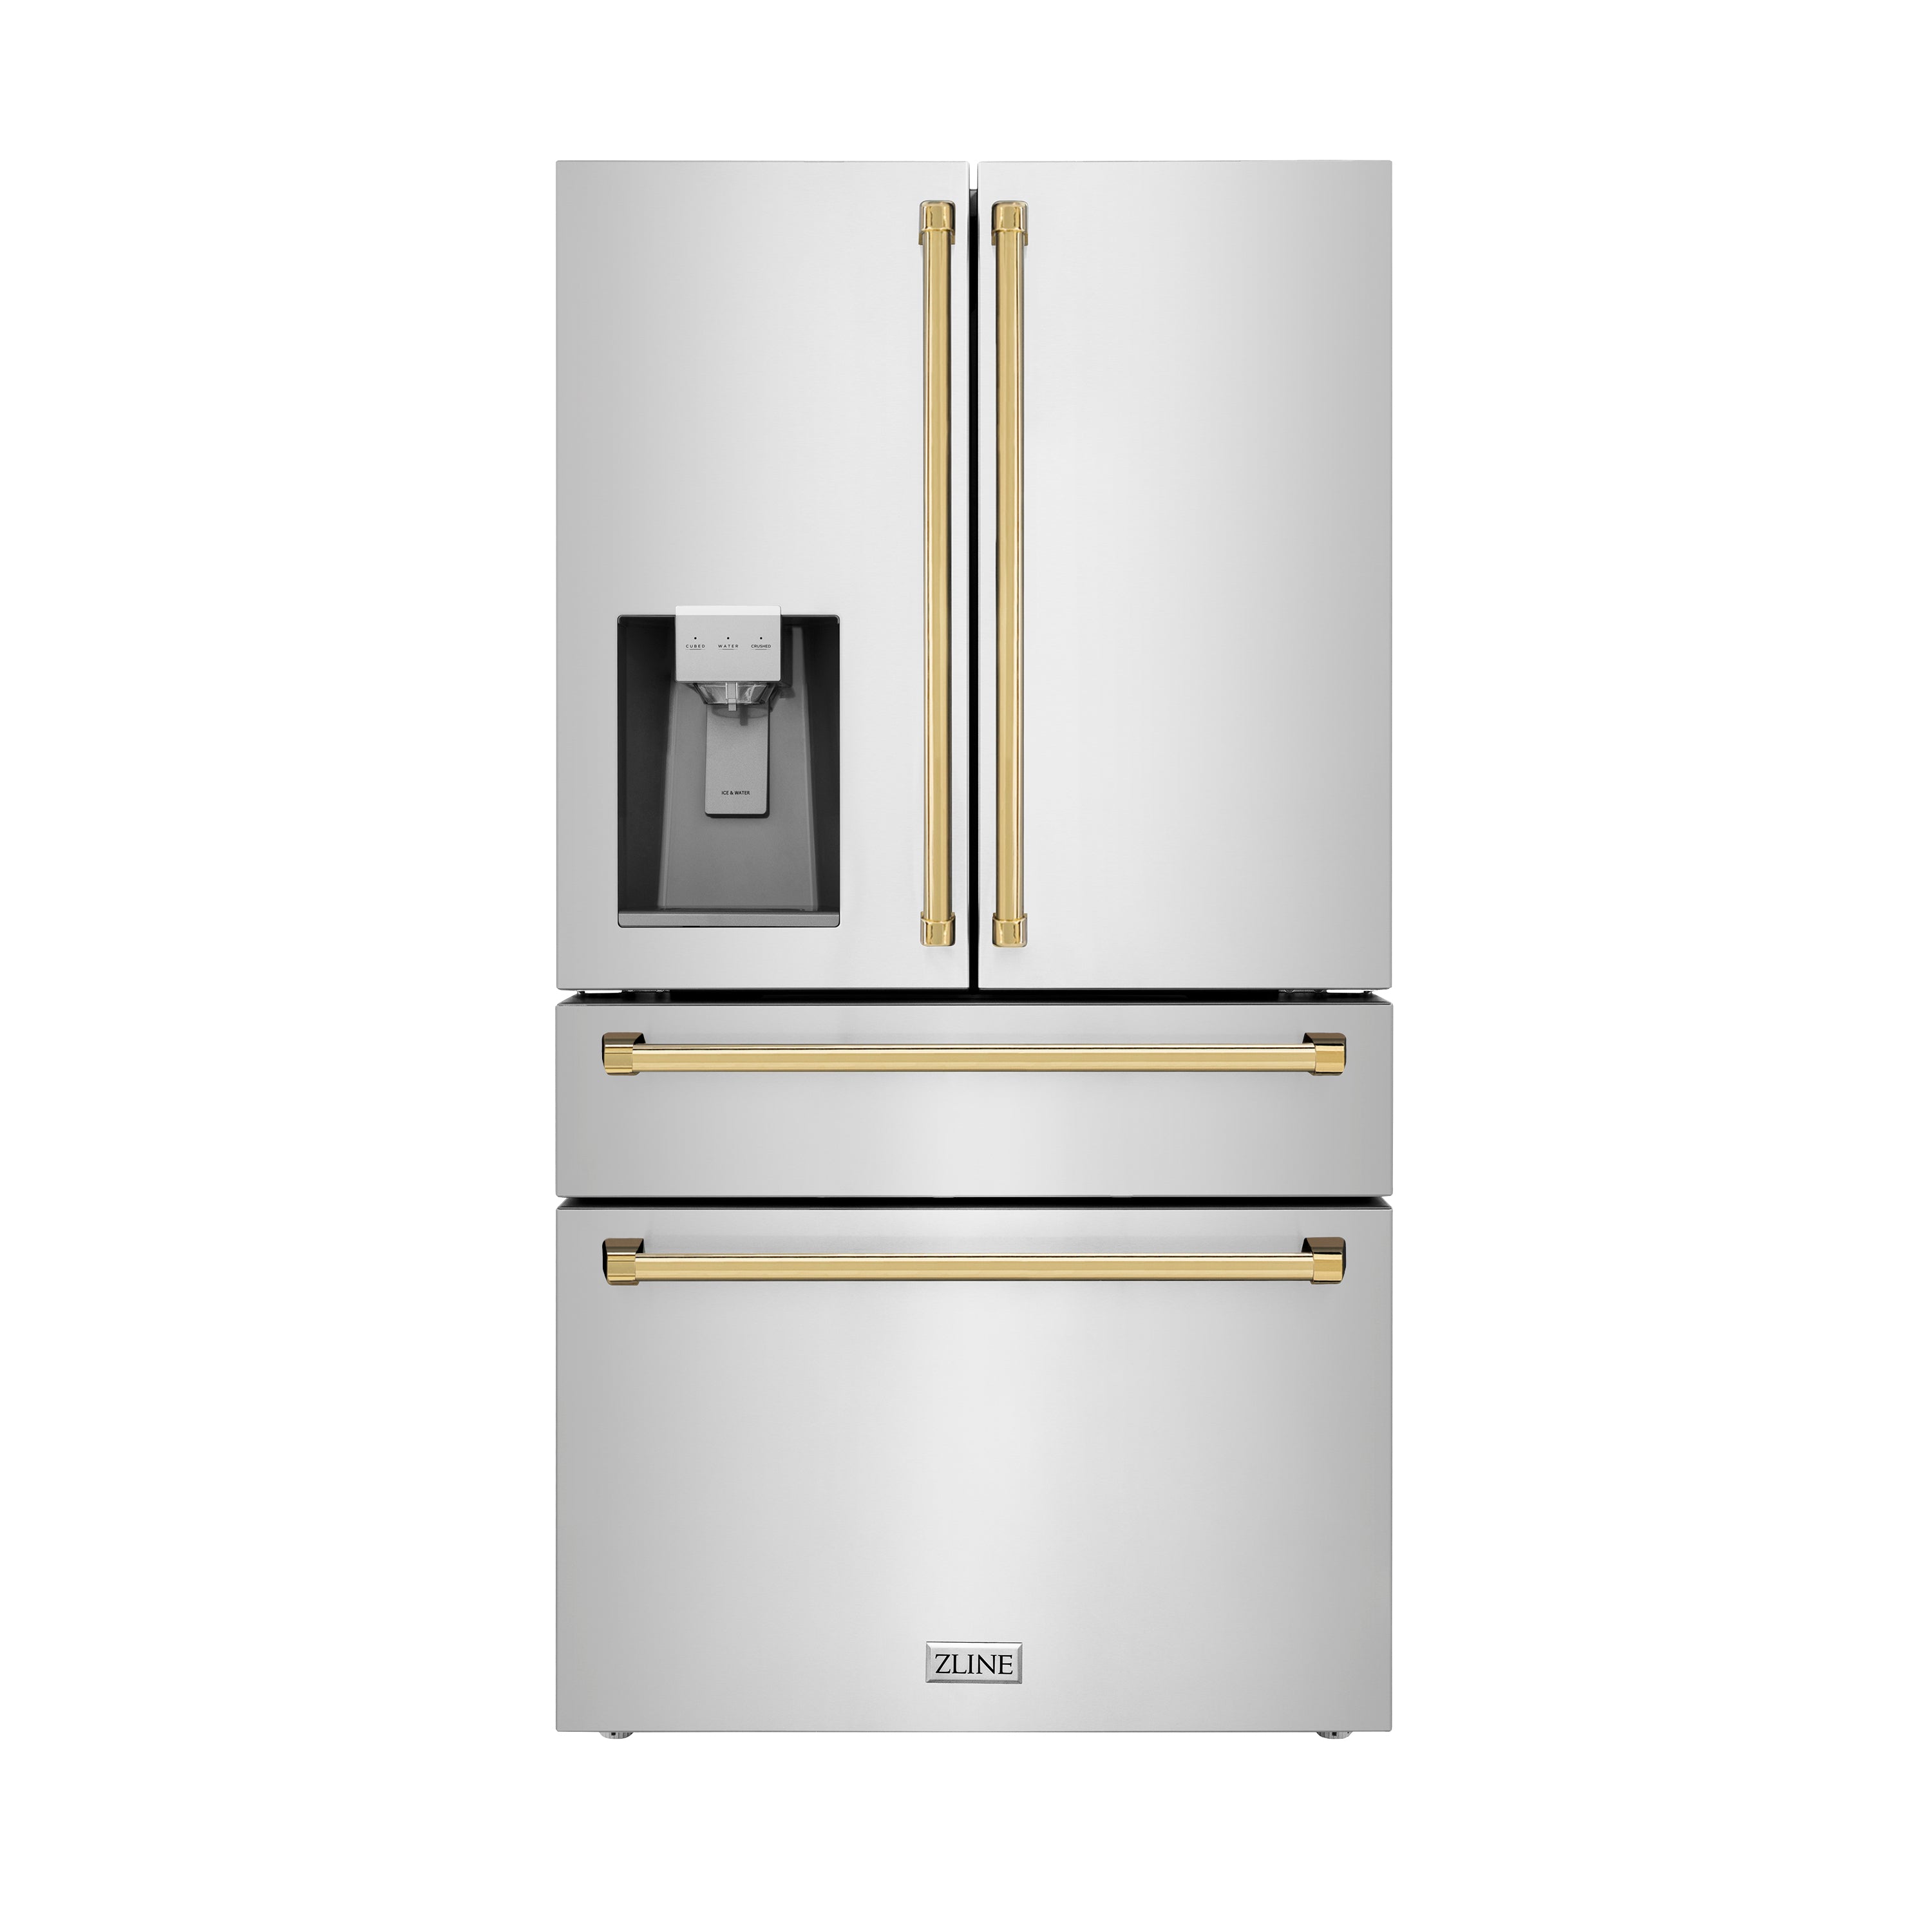 ZLINE 36" Autograph Edition 21.6 cu. ft 4-Door French Door Refrigerator with Water and Ice Dispenser in Fingerprint Resistant Stainless Steel with Polished Gold Accents (RFMZ-W-36-G)